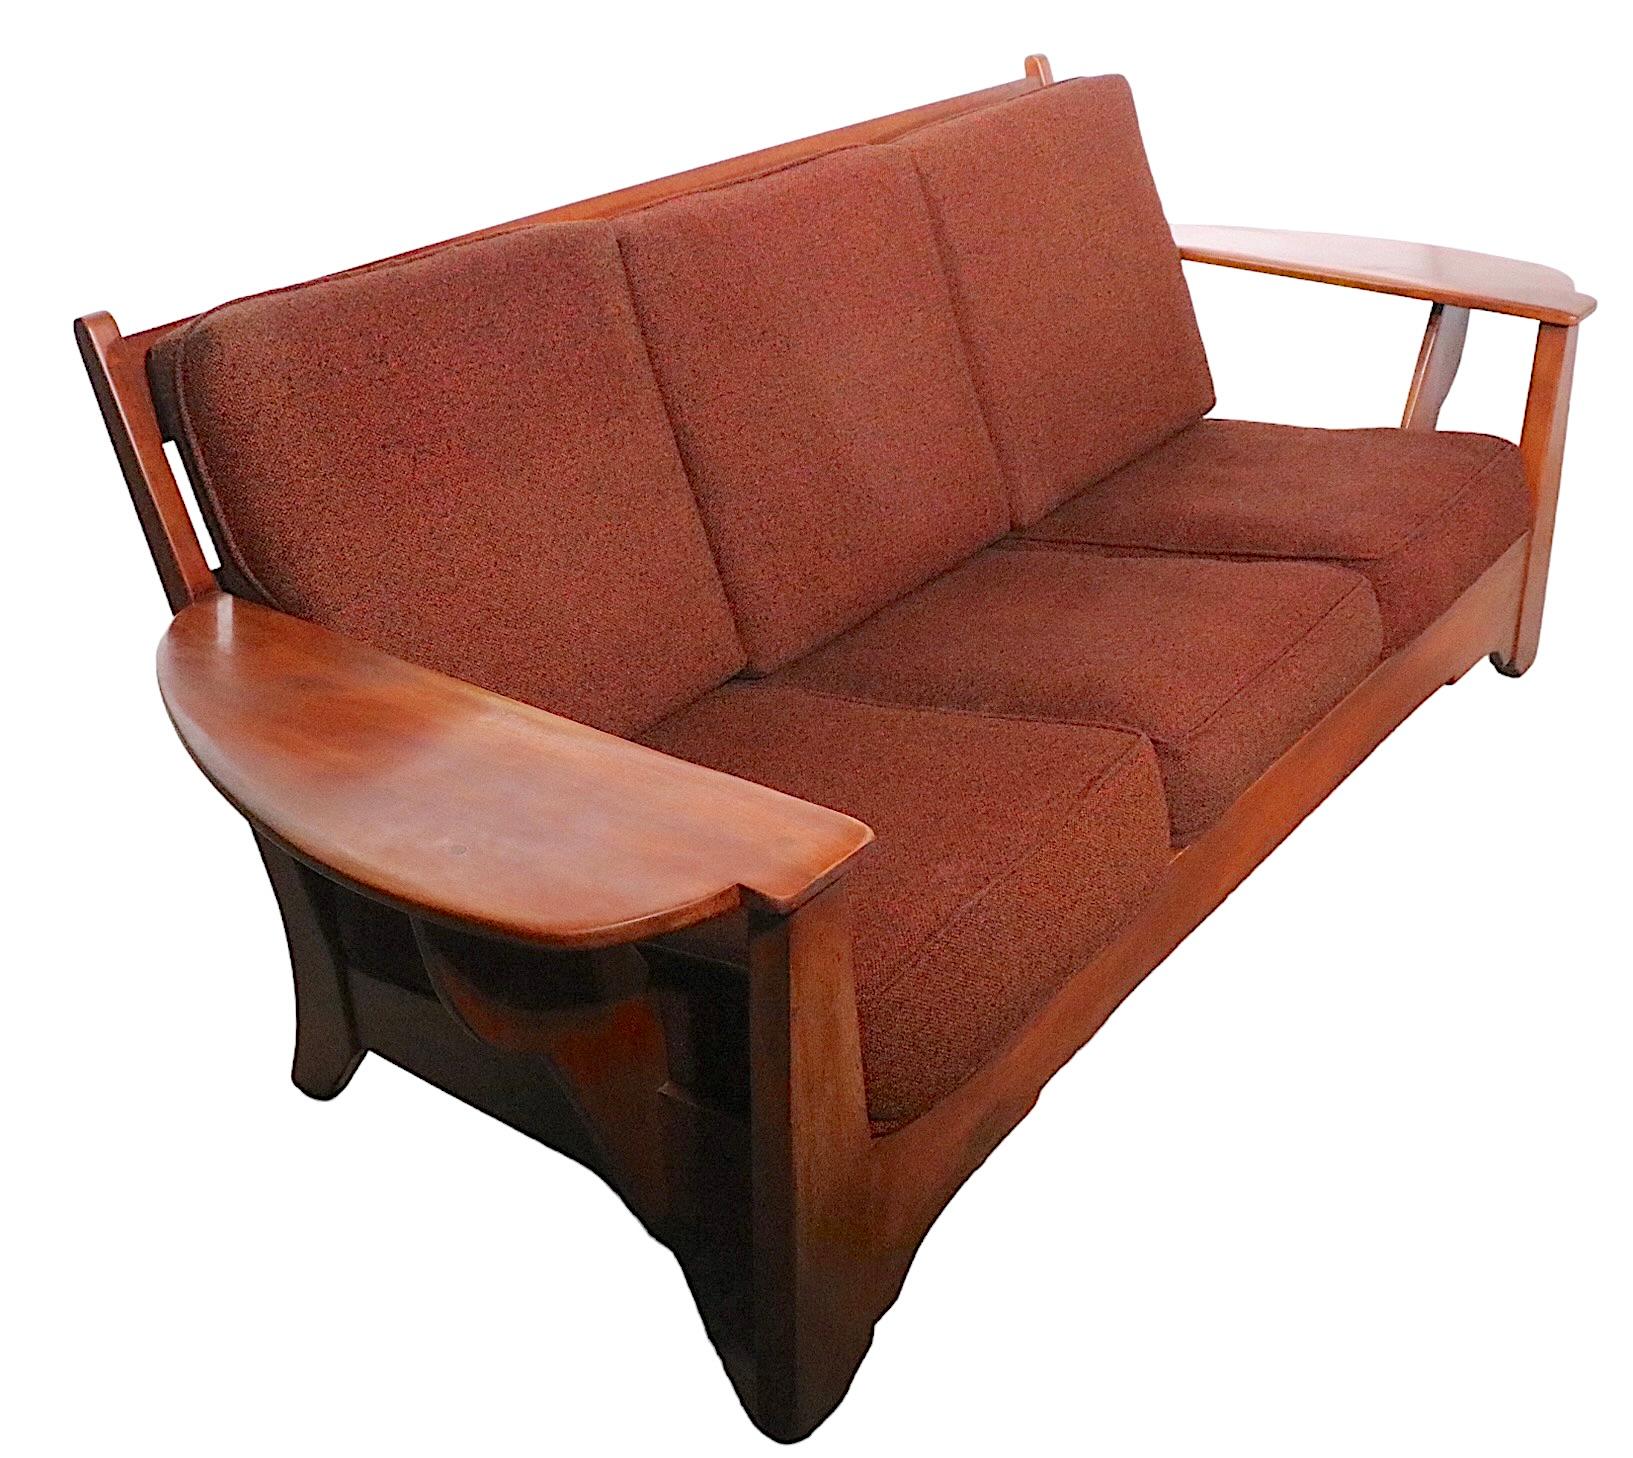 Paddle Arm Cushman Colonial Creations Sofa designed by Herman de Vries 1940s/50s 4